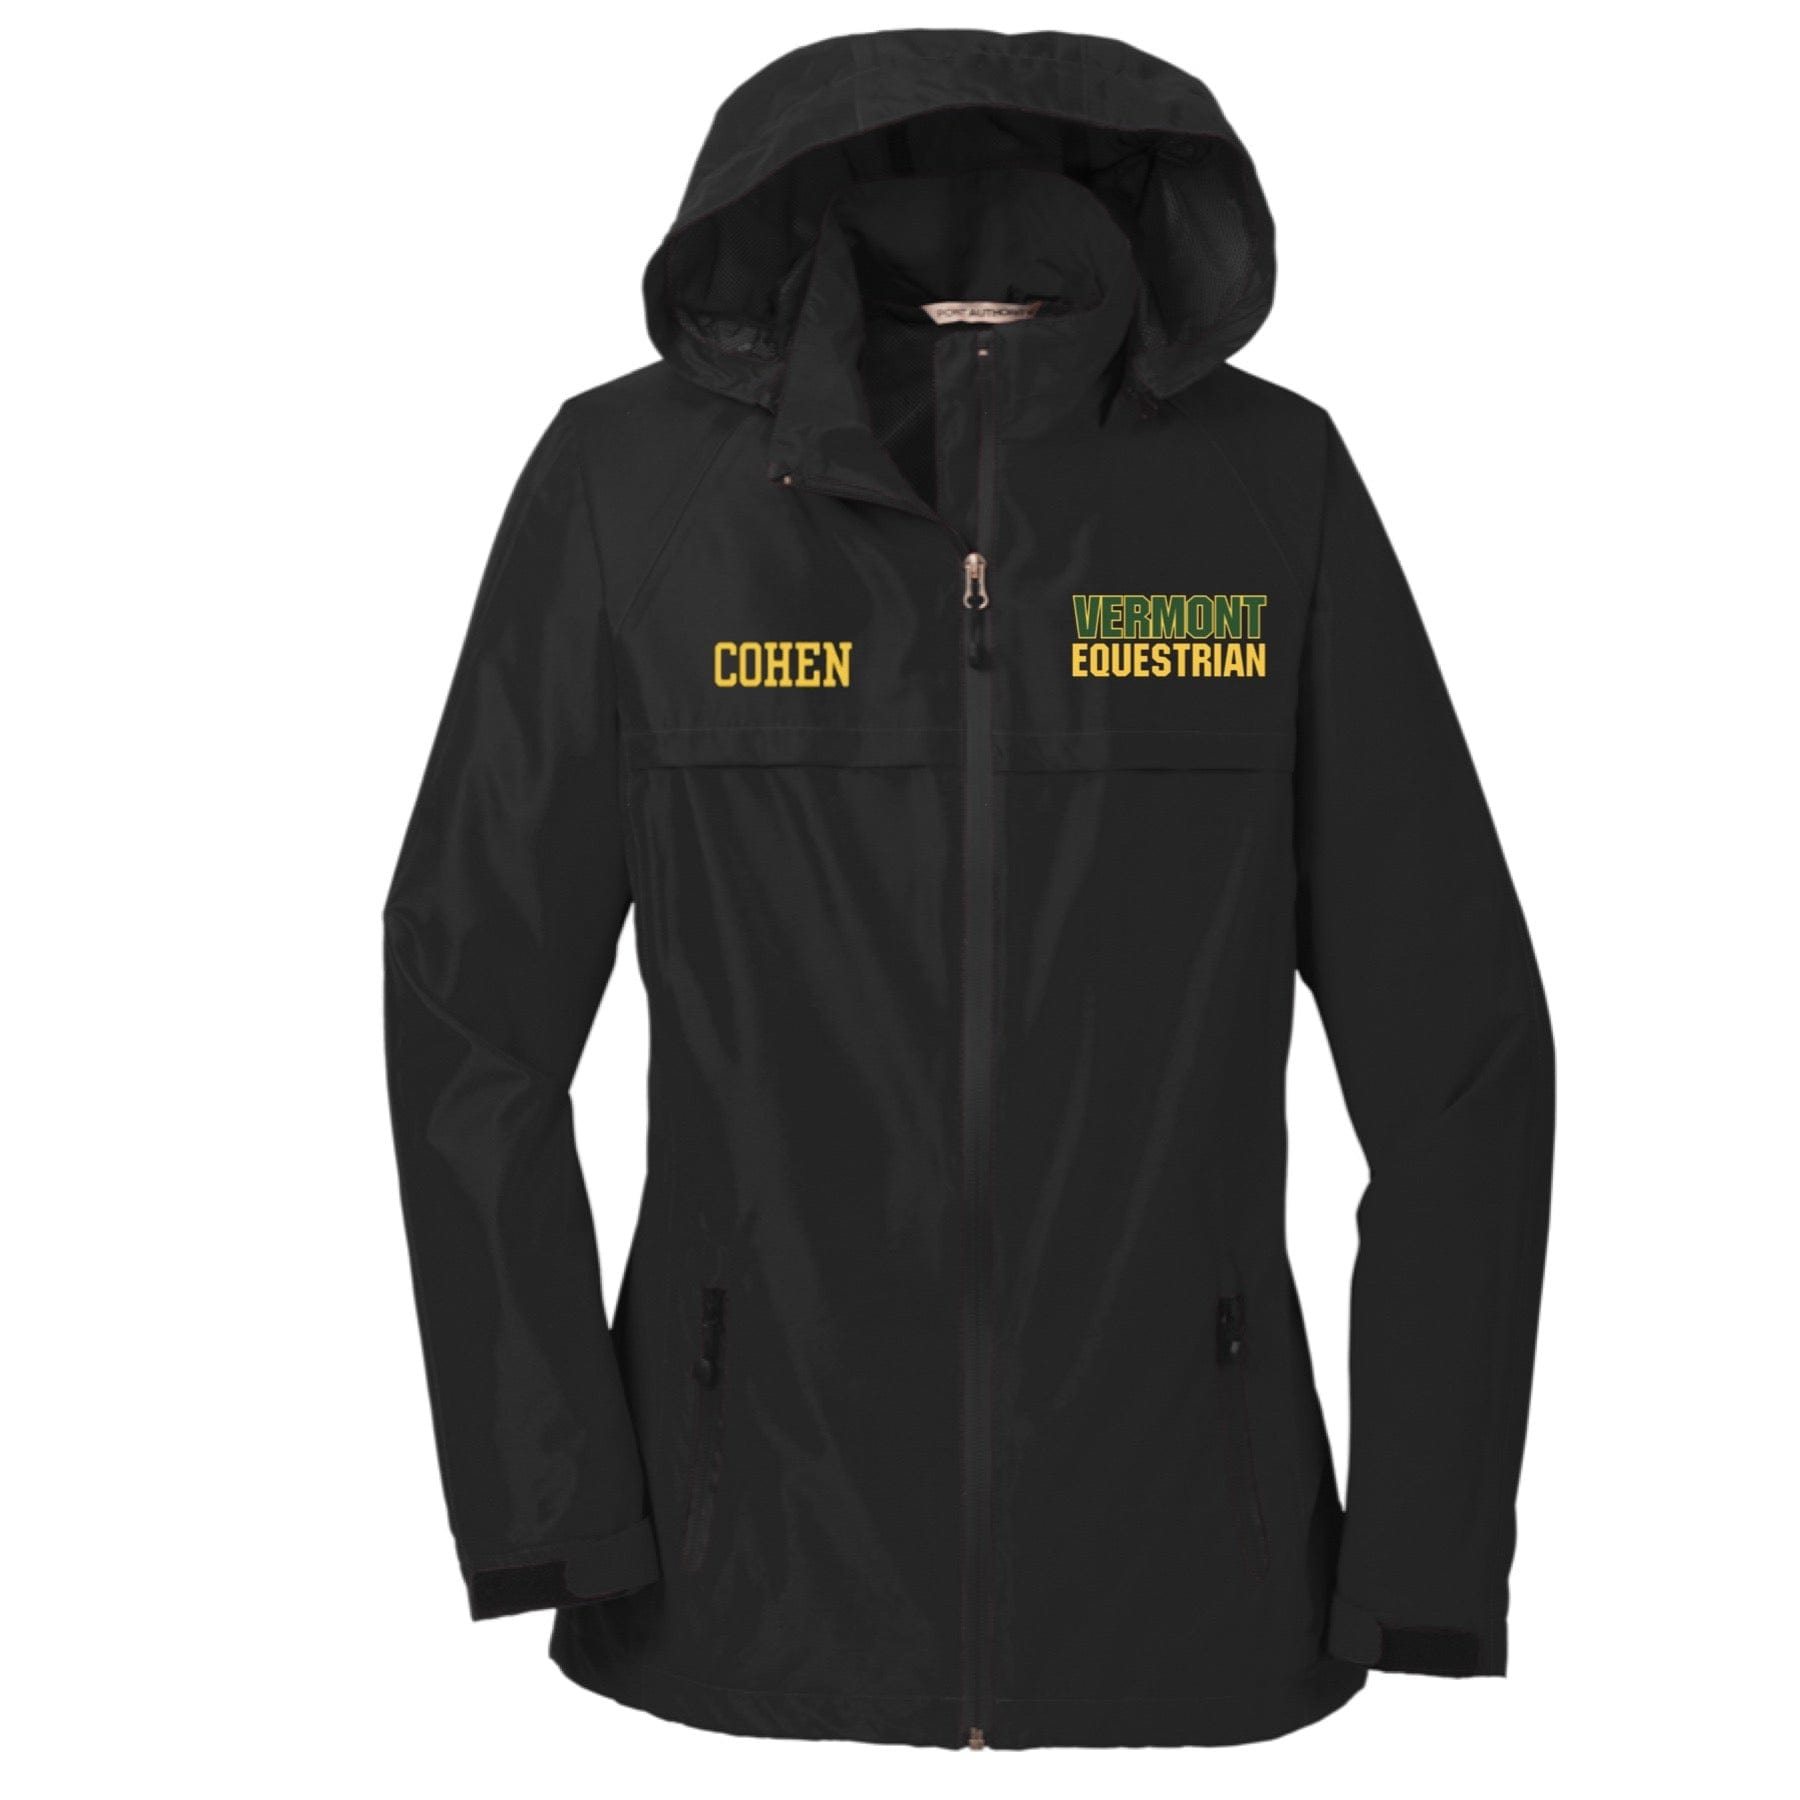 Equestrian Team Apparel Vermont Equestrian Raincoat equestrian team apparel online tack store mobile tack store custom farm apparel custom show stable clothing equestrian lifestyle horse show clothing riding clothes horses equestrian tack store